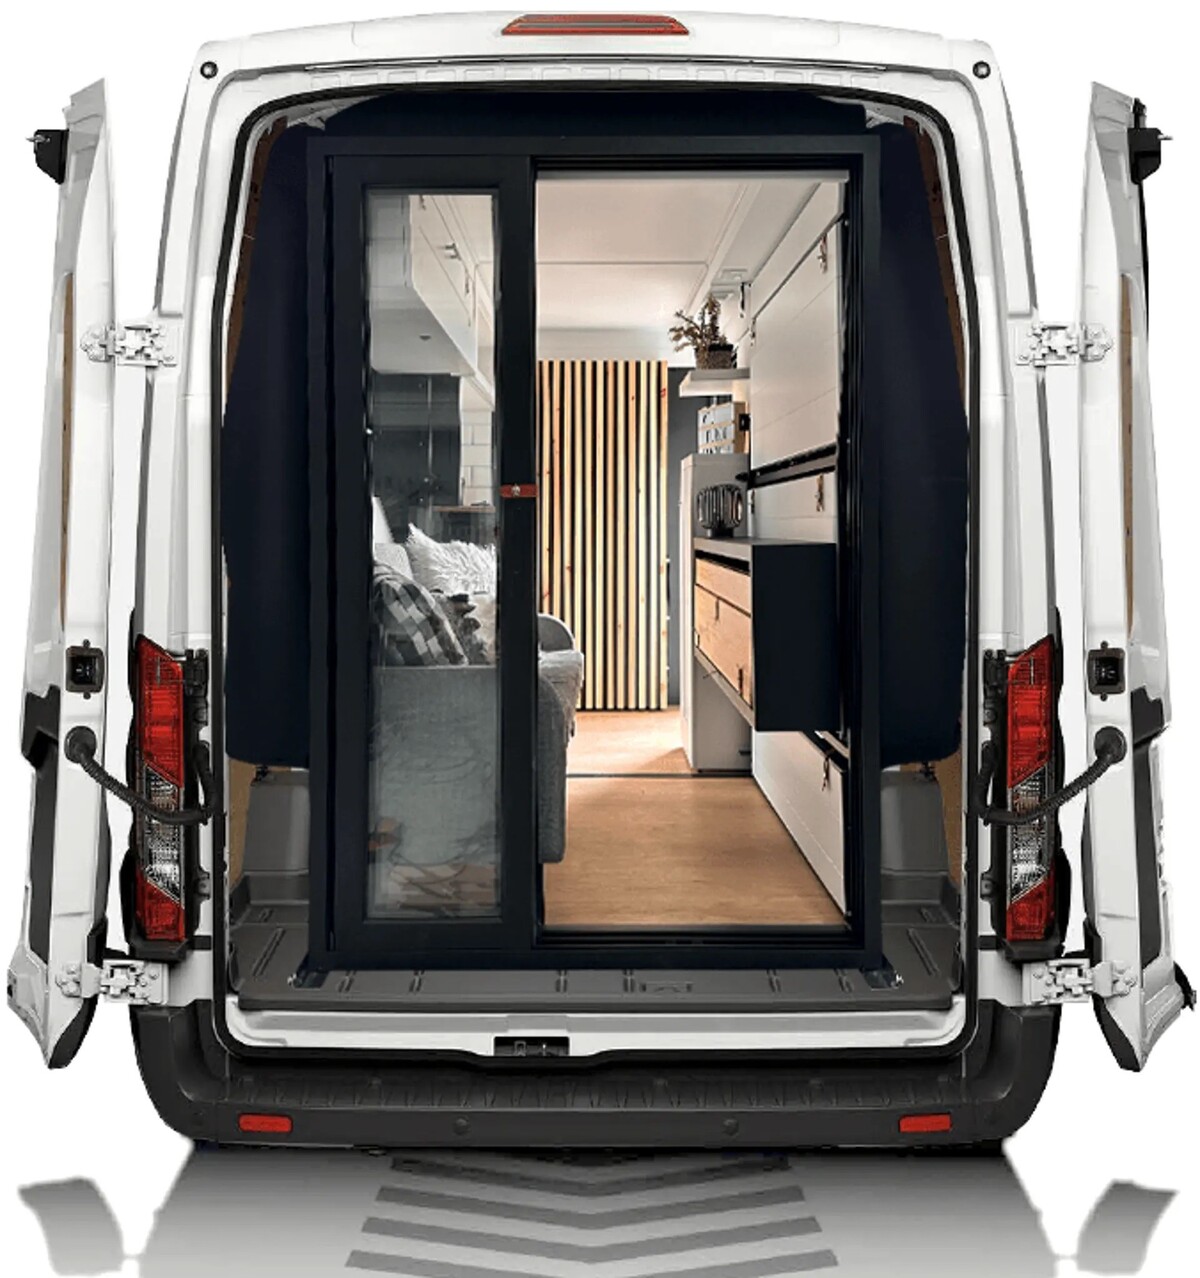 vancubic camper modules turn your cargo van into a modern house on wheels in just an hour 5